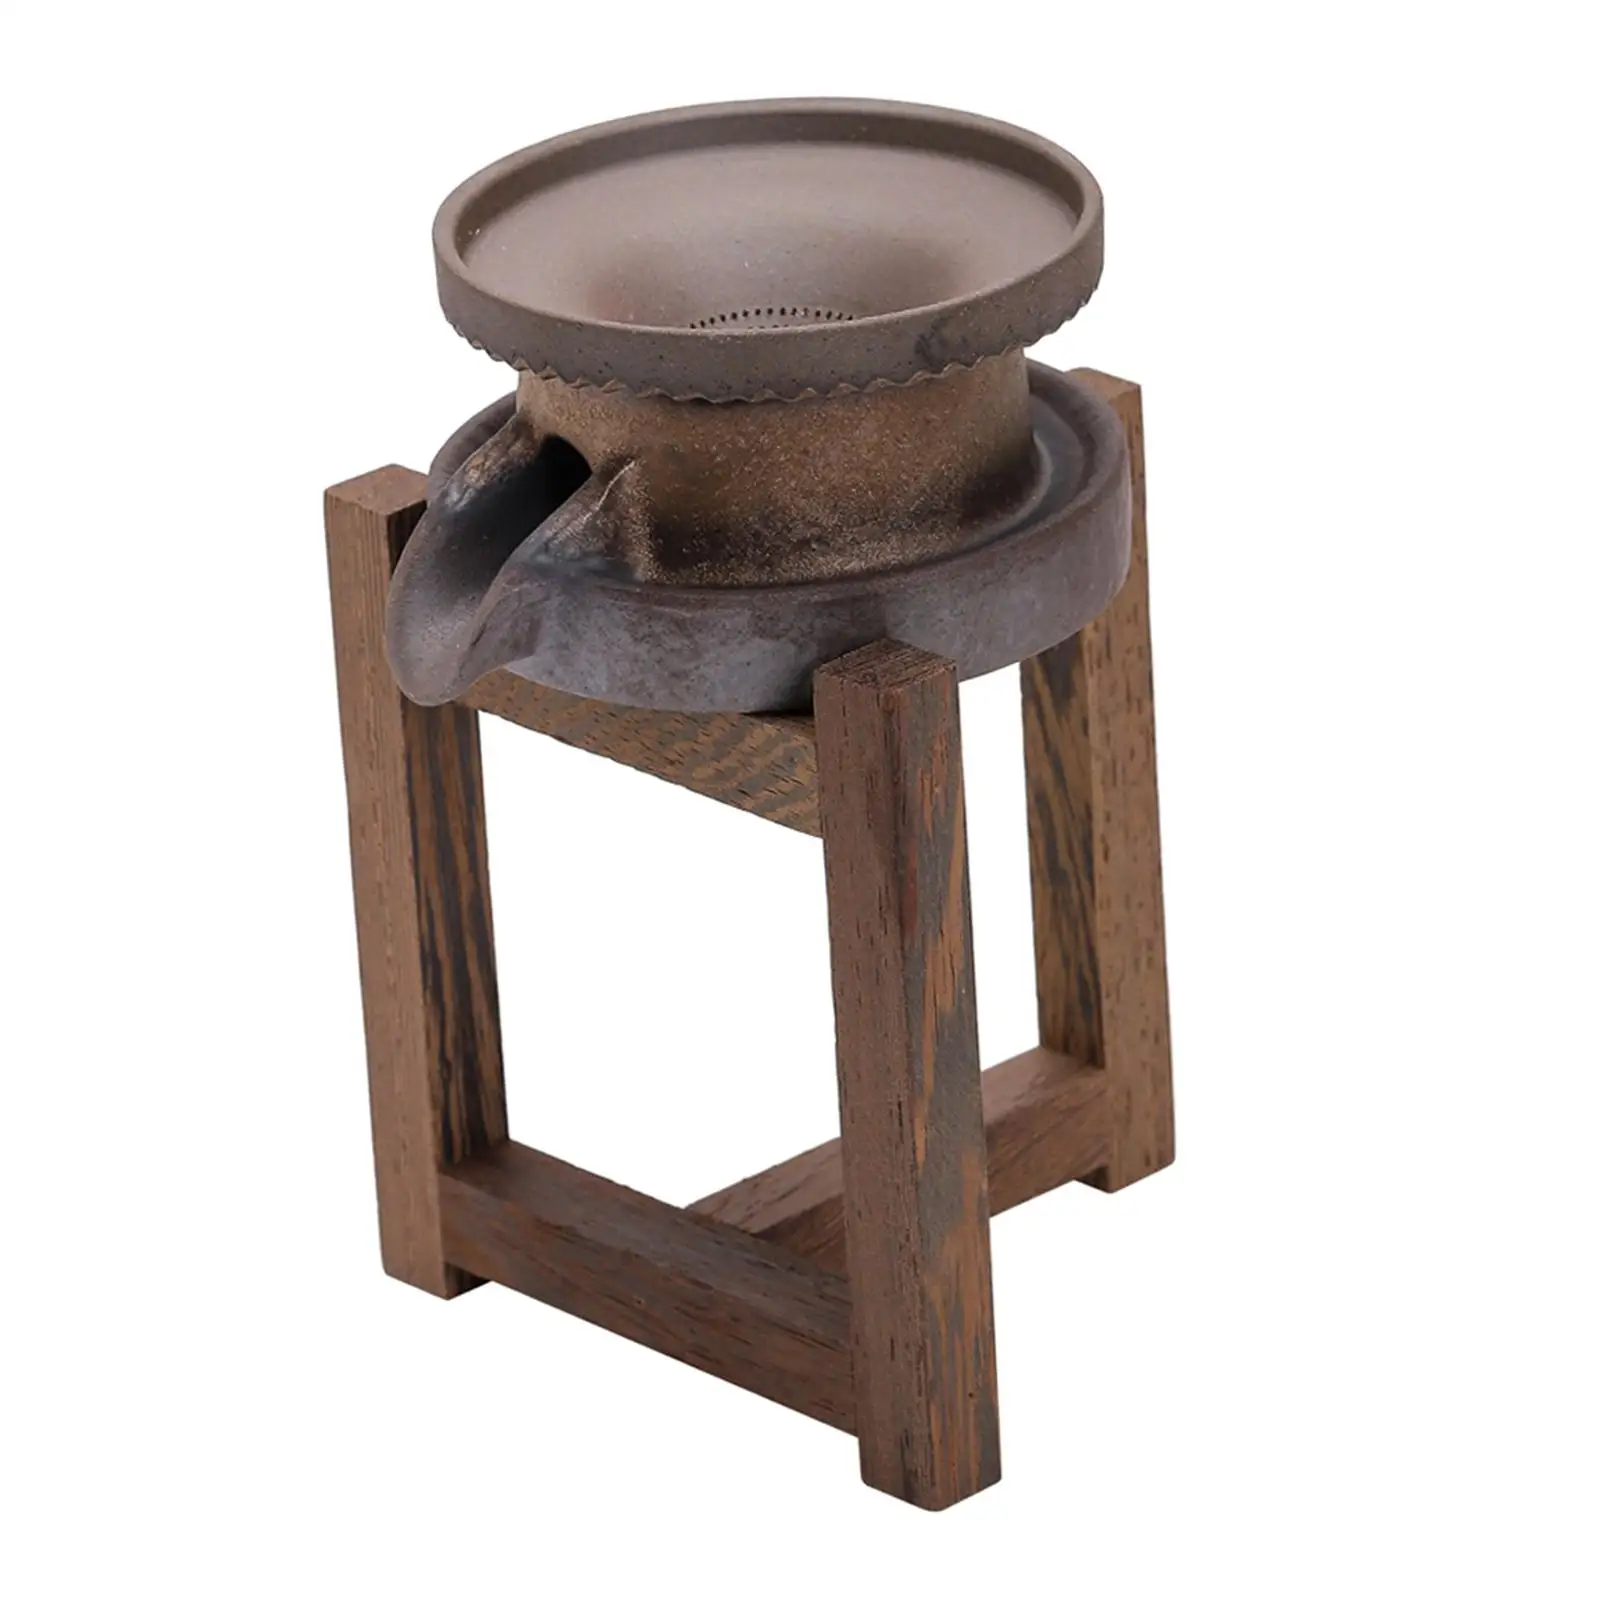 Tea Filter Set Chinese Kung Fu Drinkware Ceramic Tea Funnel Holder with Wooden Shelf Tea Compartment for Shop Cafe Holiday Gifts